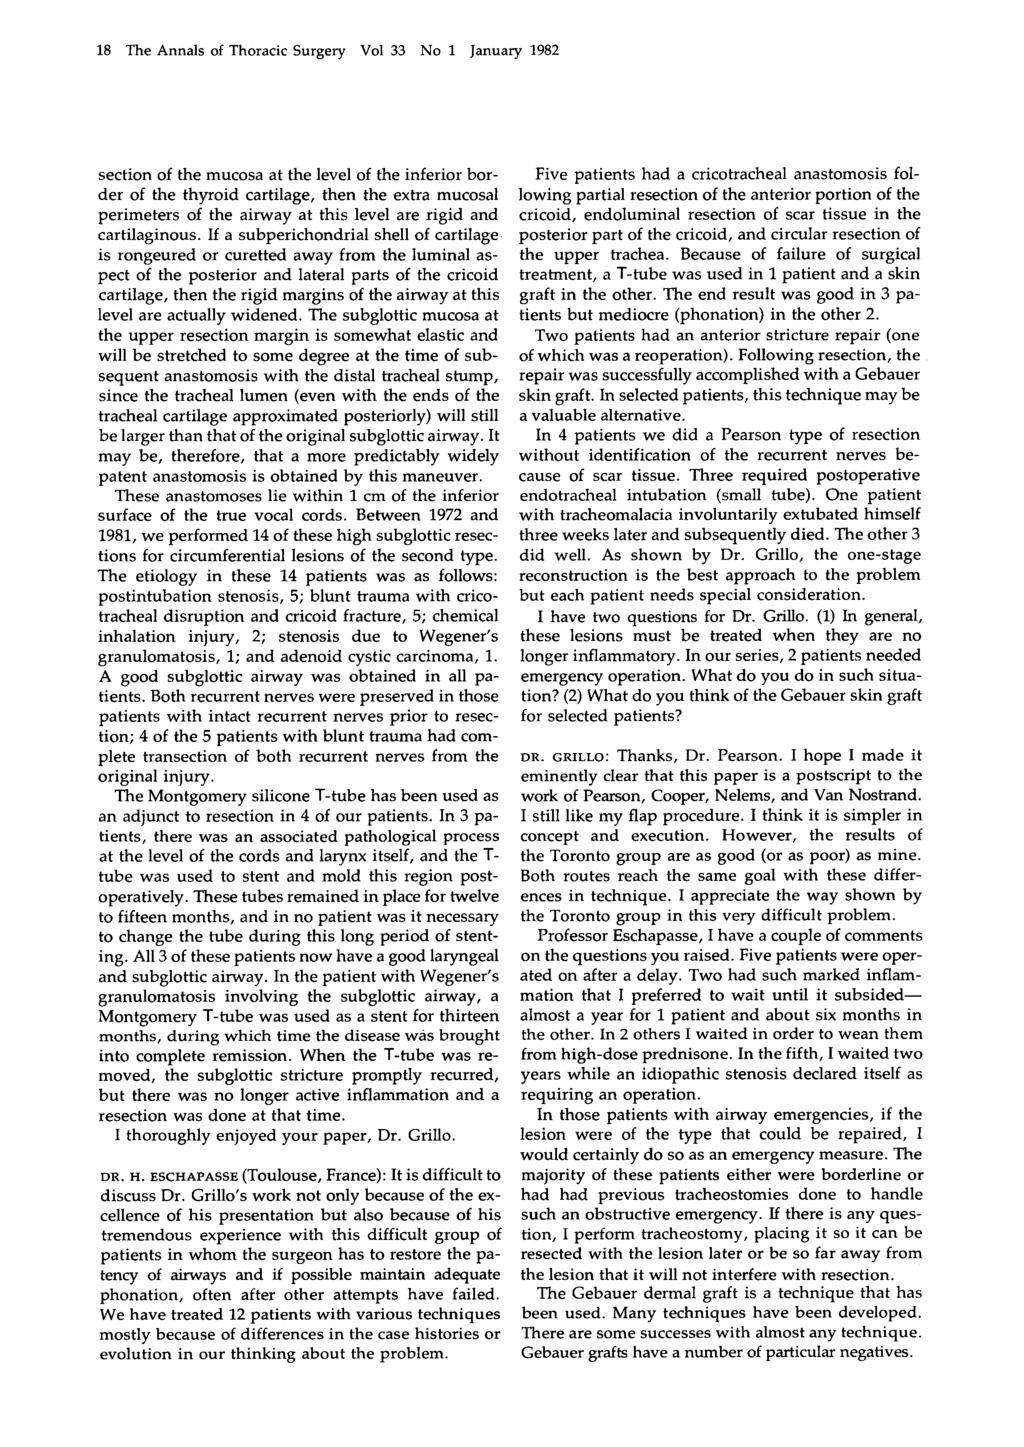 18 The Annals of Thoracic Surgery Vol 33 No 1 January 1982 section of the mucosa at the level of the inferior border of the thyroid cartilage, then the extra mucosal perimeters of the airway at this